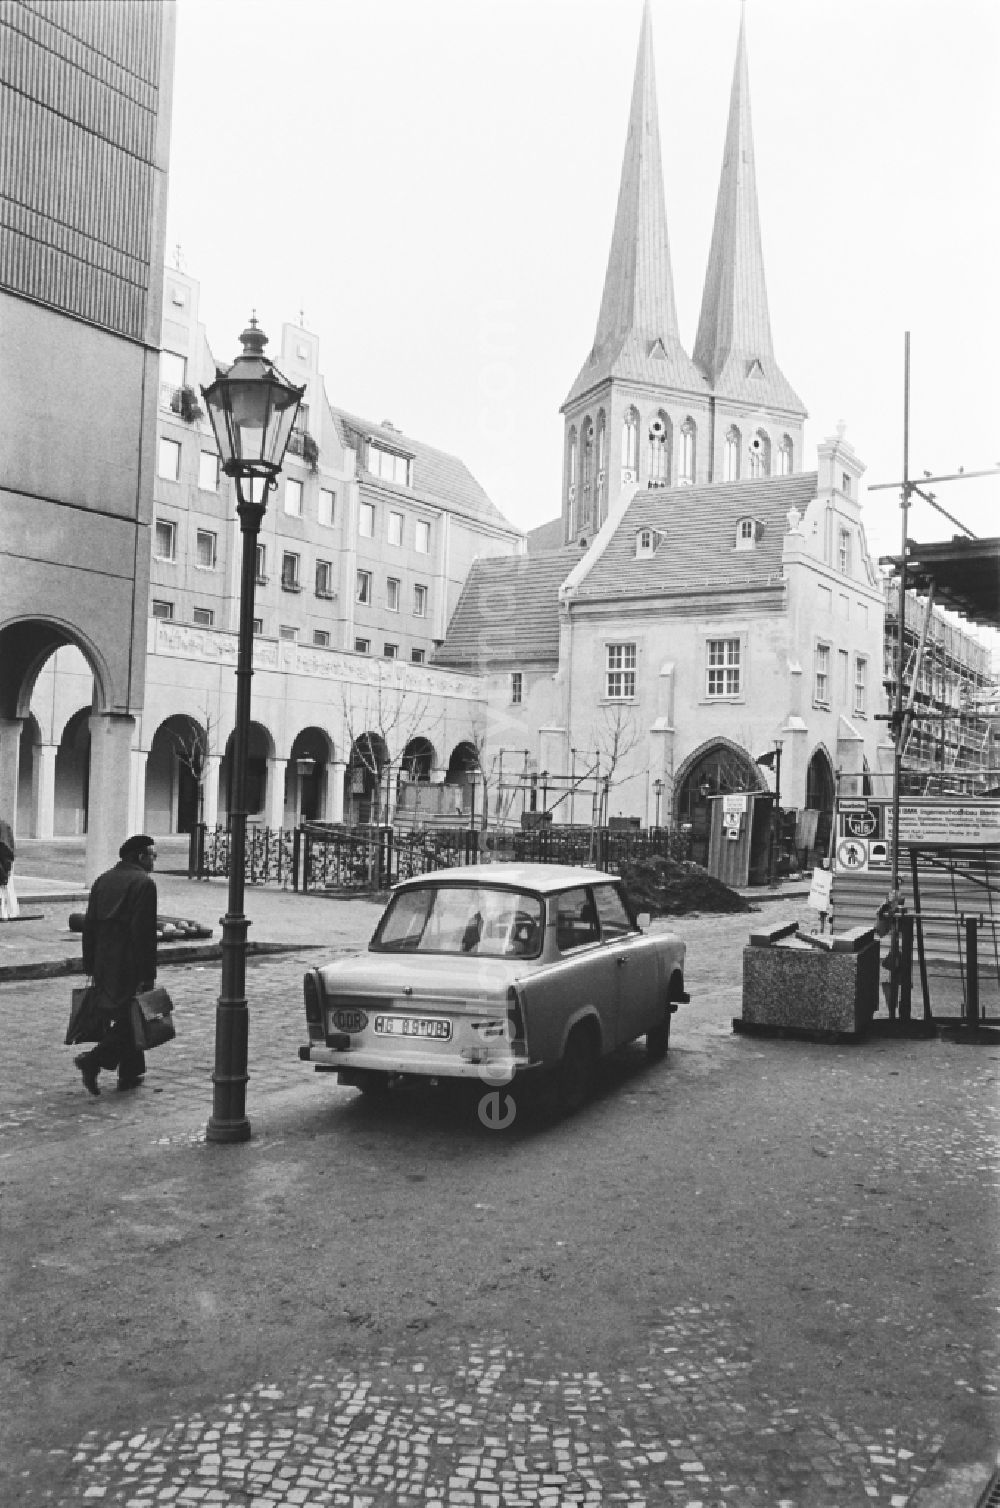 GDR image archive: Berlin - Construction site and car of the type Trabant P 6